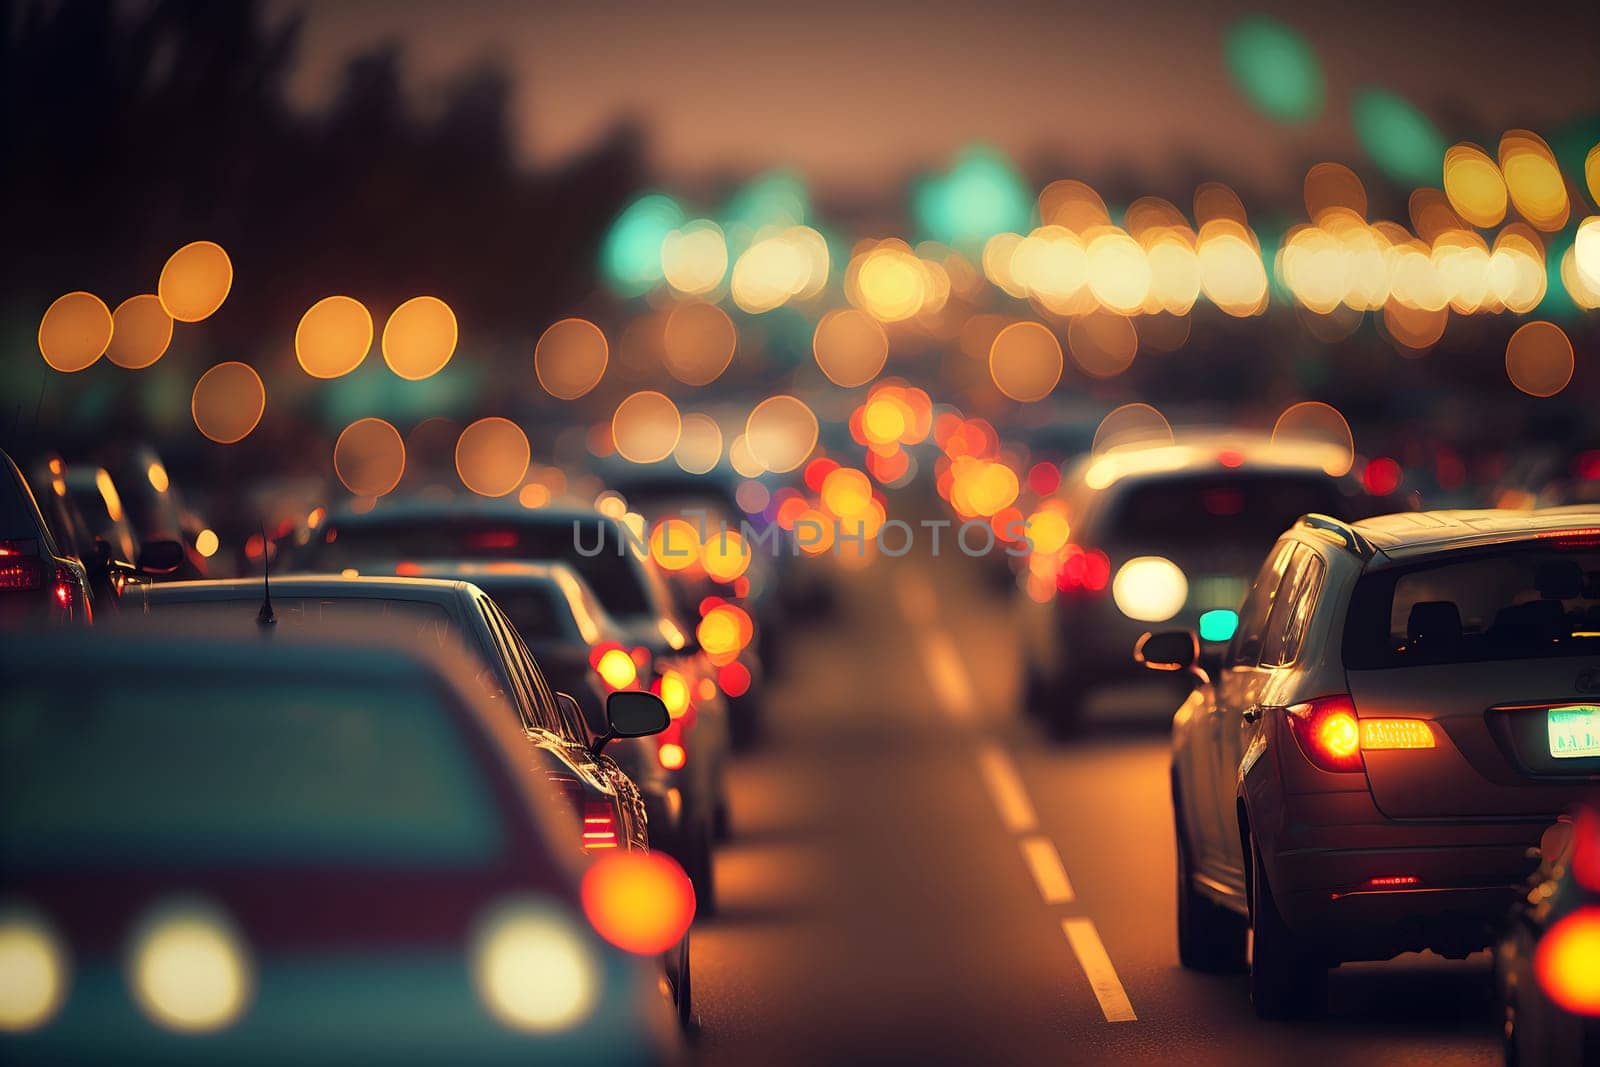 night traffic jam with shallow depth of field, neural network generated art. Digitally generated image. Not based on any actual scene or pattern.